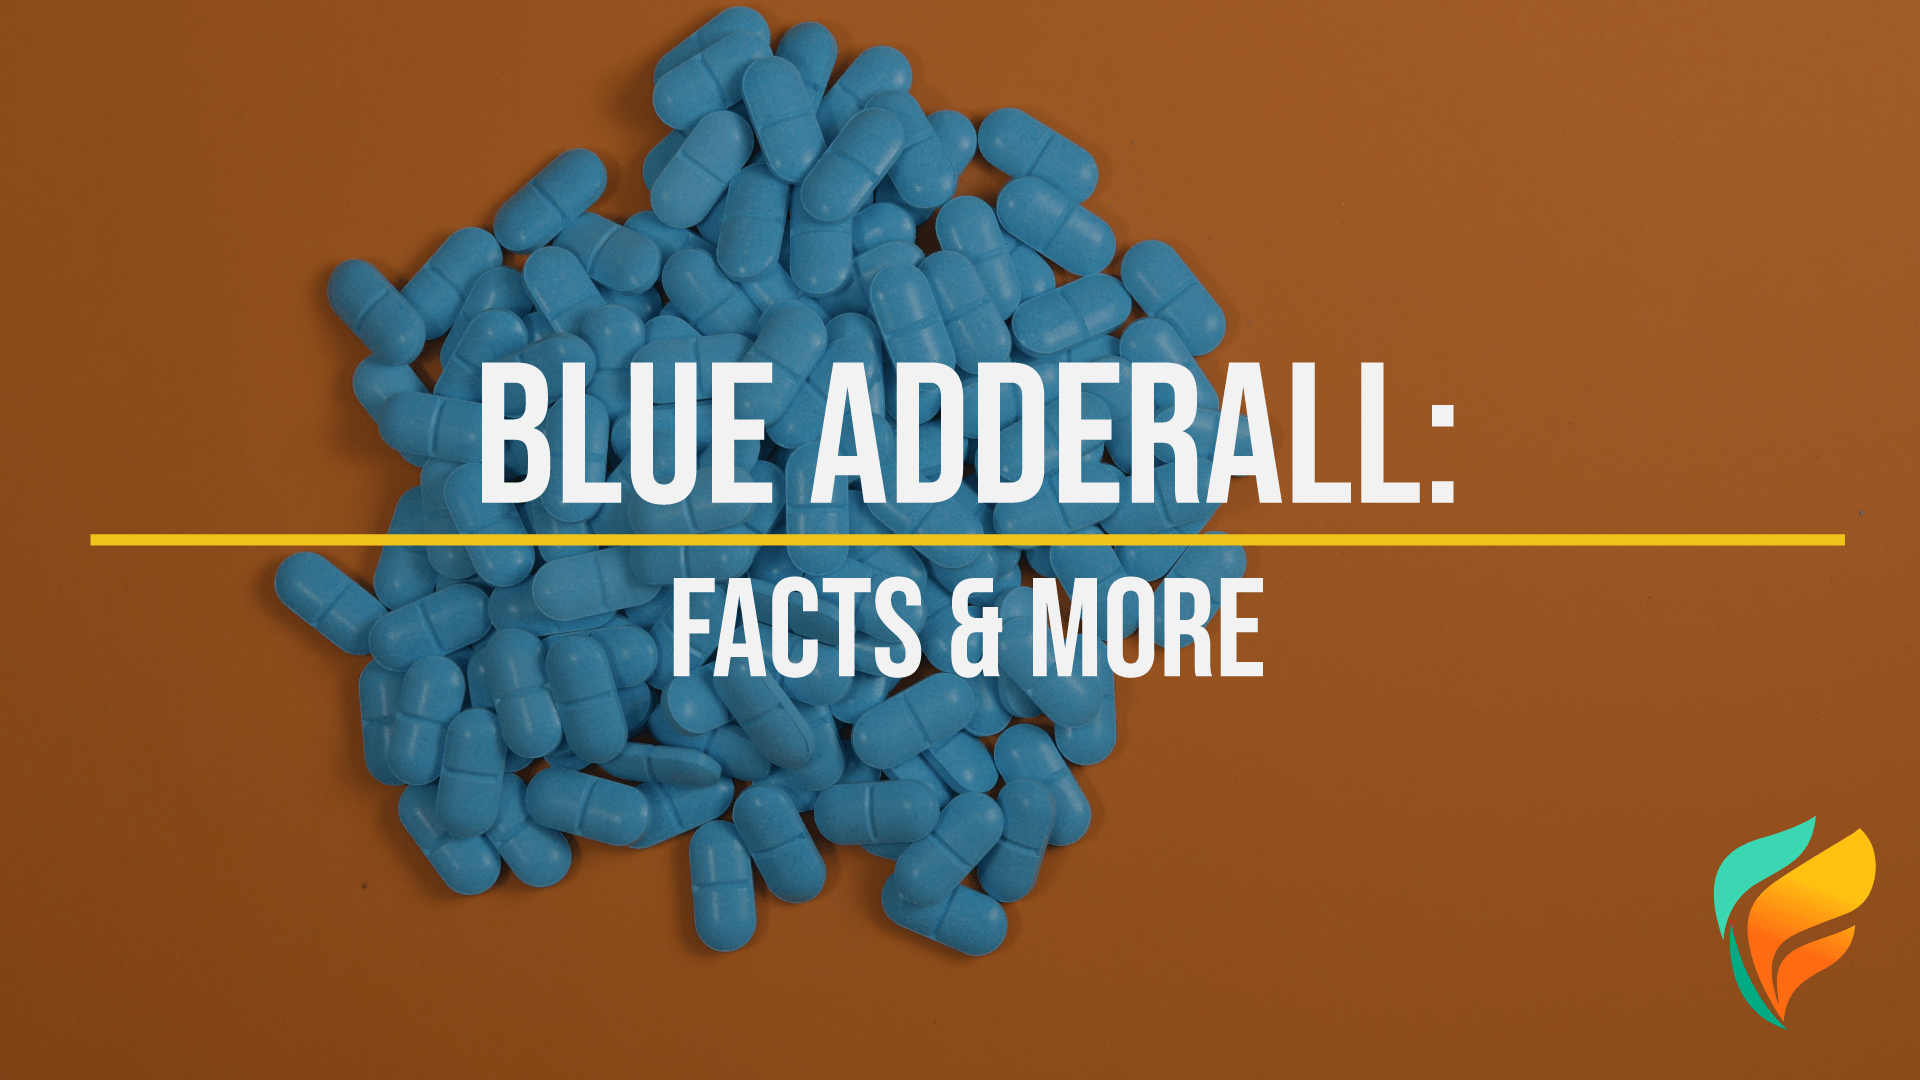 Modafinil Vs Adderall: Pros, Cons, And More